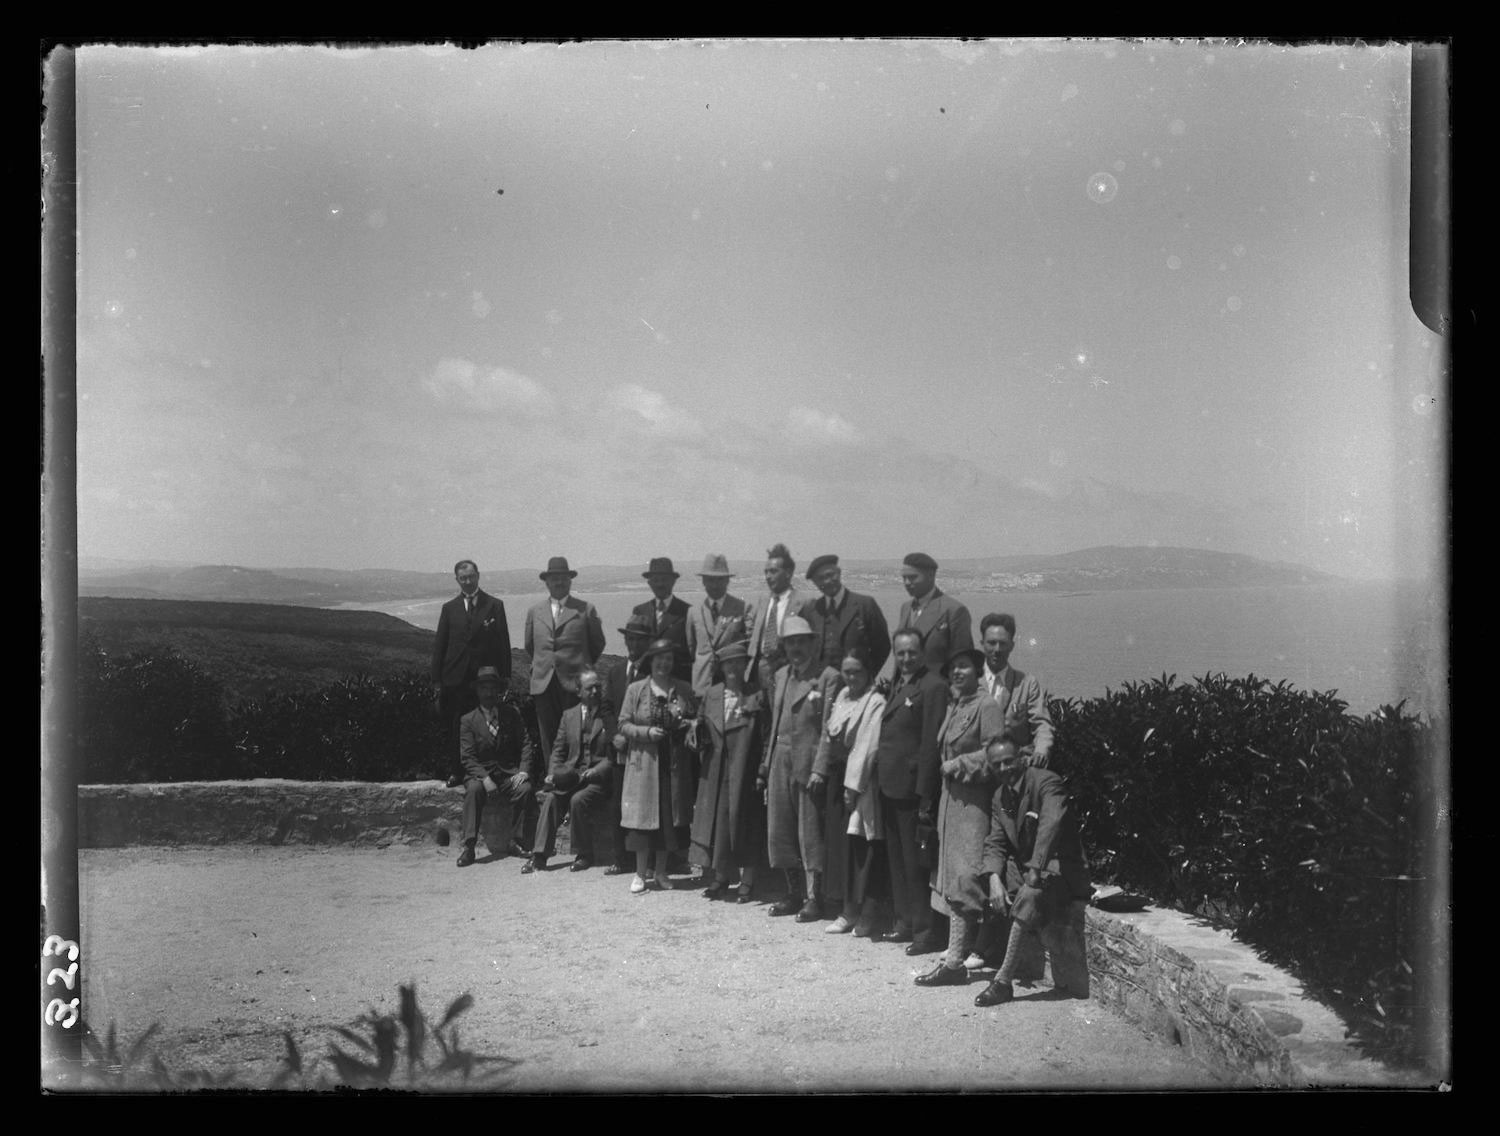 Malabata - A group in European garb poses for a photo with a view of Tangier in the background.